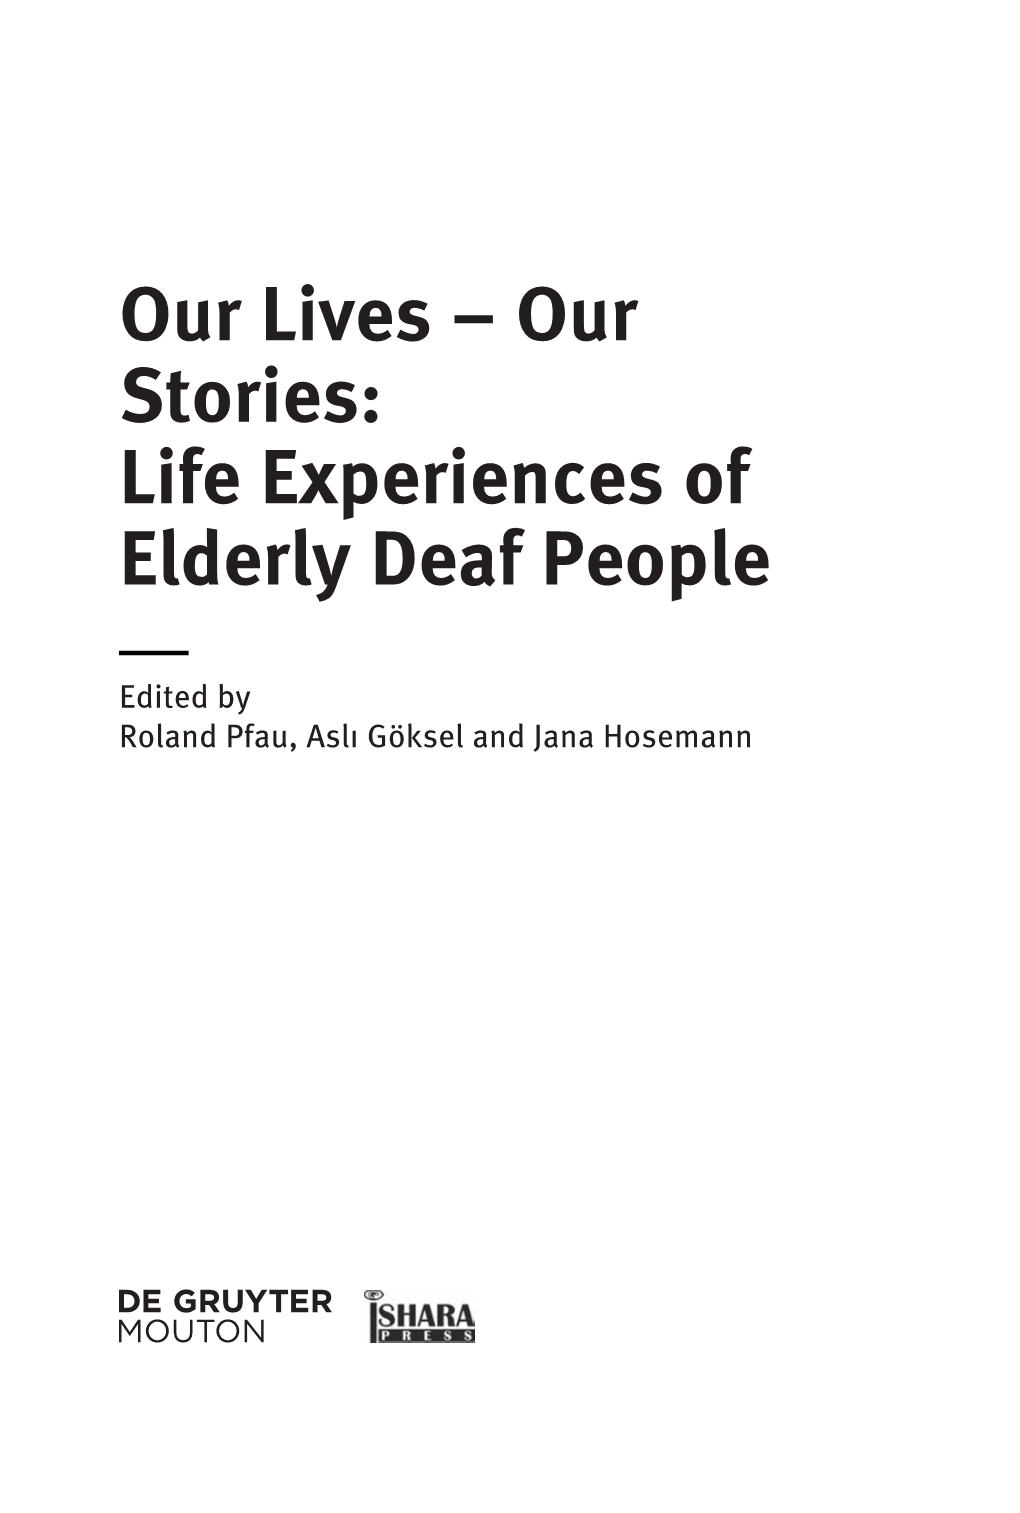 Our Lives – Our Stories: Life Experiences of Elderly Deaf People